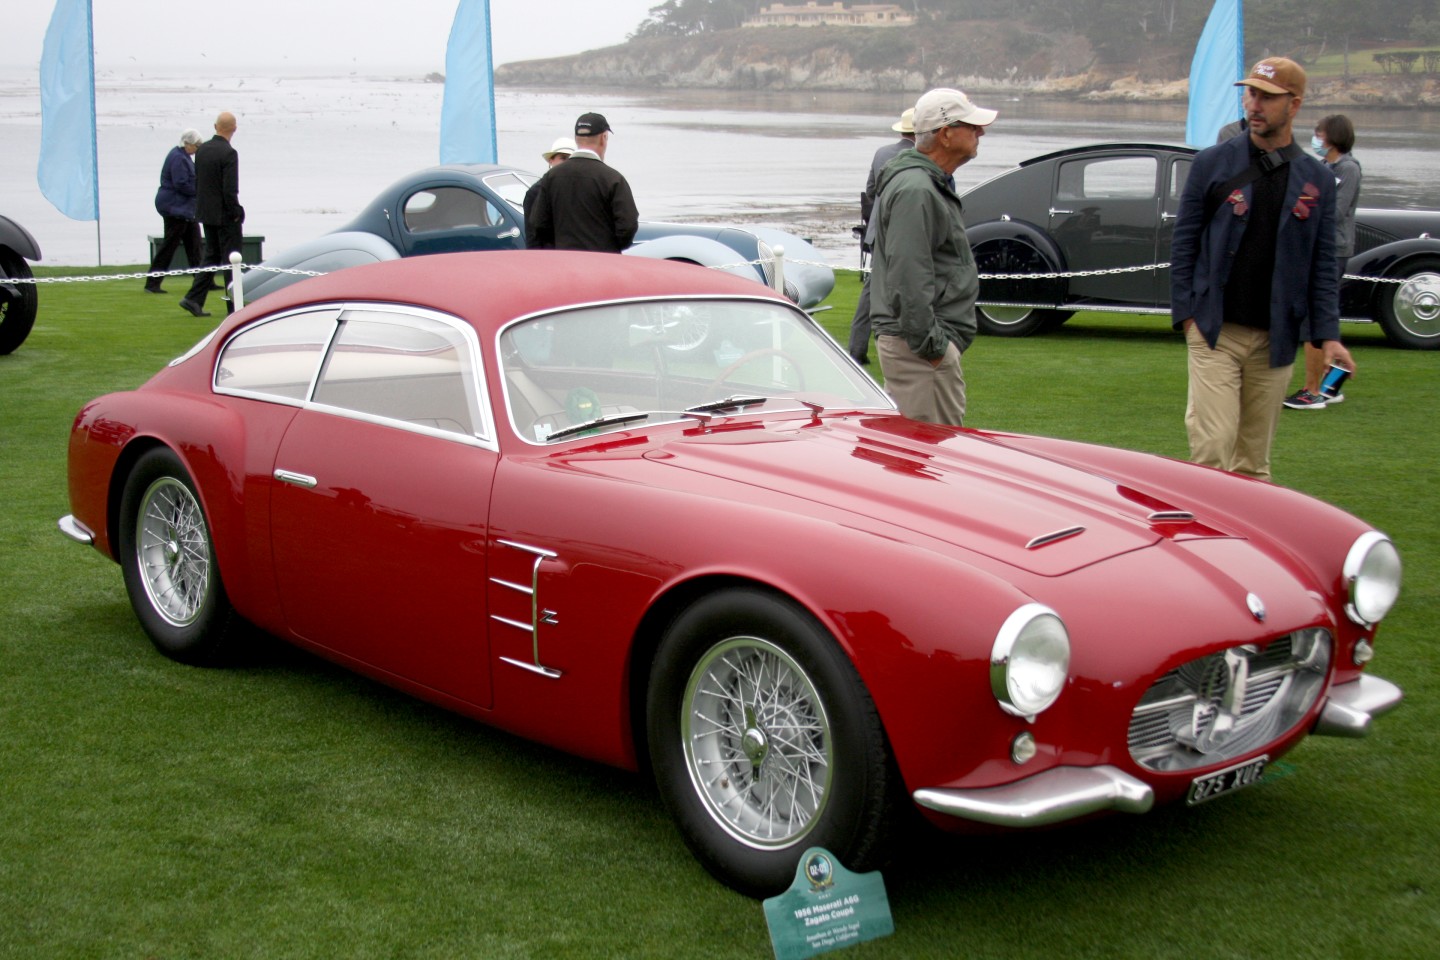 One of the four Best Of Show Nominees from the 2021 Pebble Beach Concours d'Elegance, this 1956 Maserati A6G Zagato Coupé is owned by Jonathan & Wendy Segal of San Diego, California. The Maserati was also the winner of the Postwar Sportscar Class and the Strother MacMinn Most Elegant Sports Car Award.